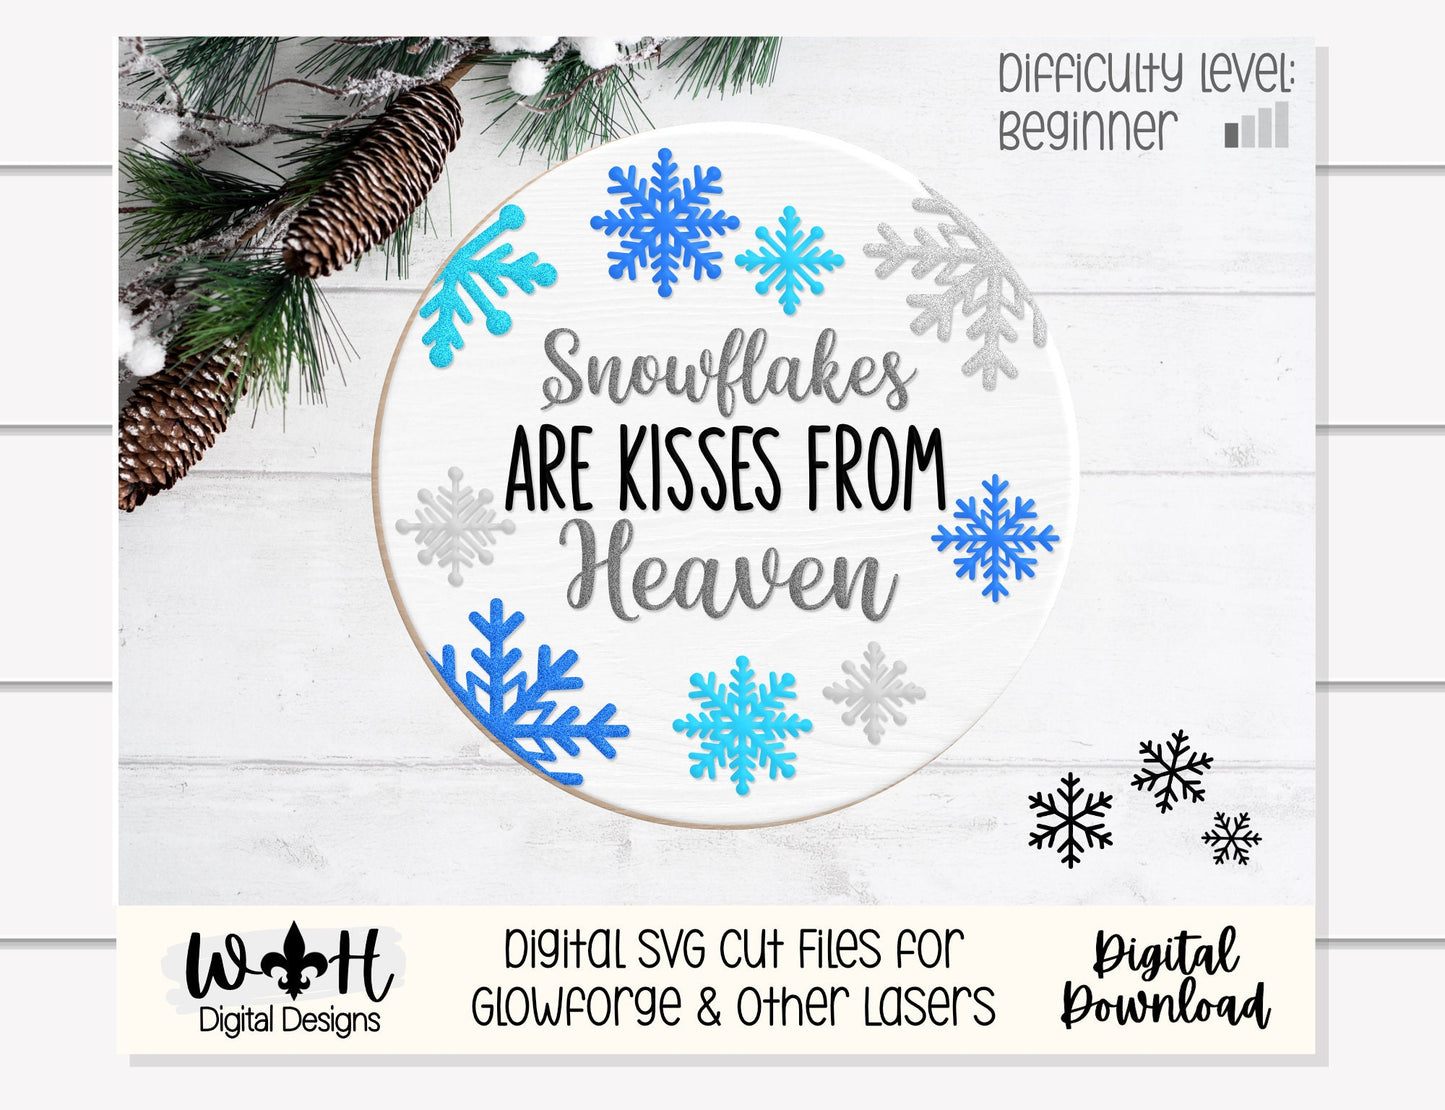 Snowflakes Are Kisses From Heaven Round - Christmas Sign Making and DIY Kits - Single Line Cut File For Glowforge Lasers - Digital SVG File